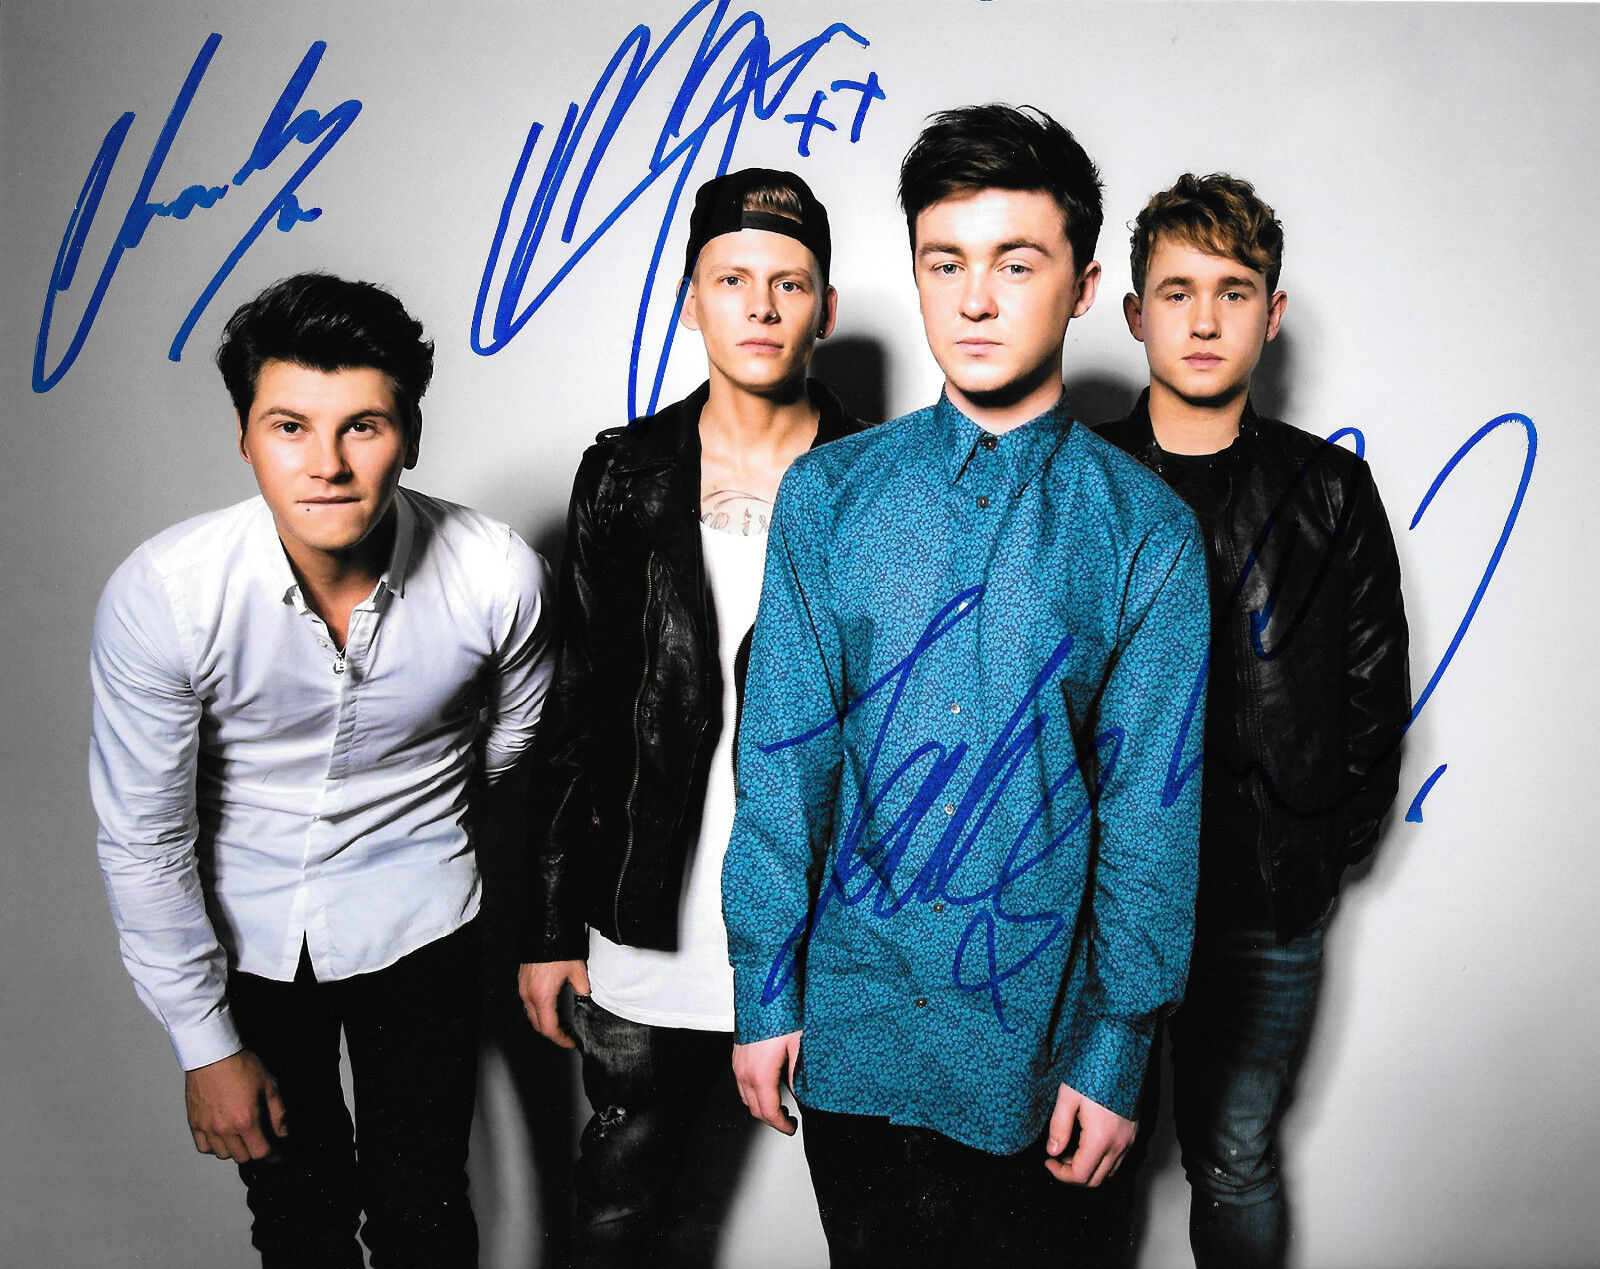 GFA Me and My Broken Heart * RIXTON * Signed 8x10 Photo Poster painting AD5 COA